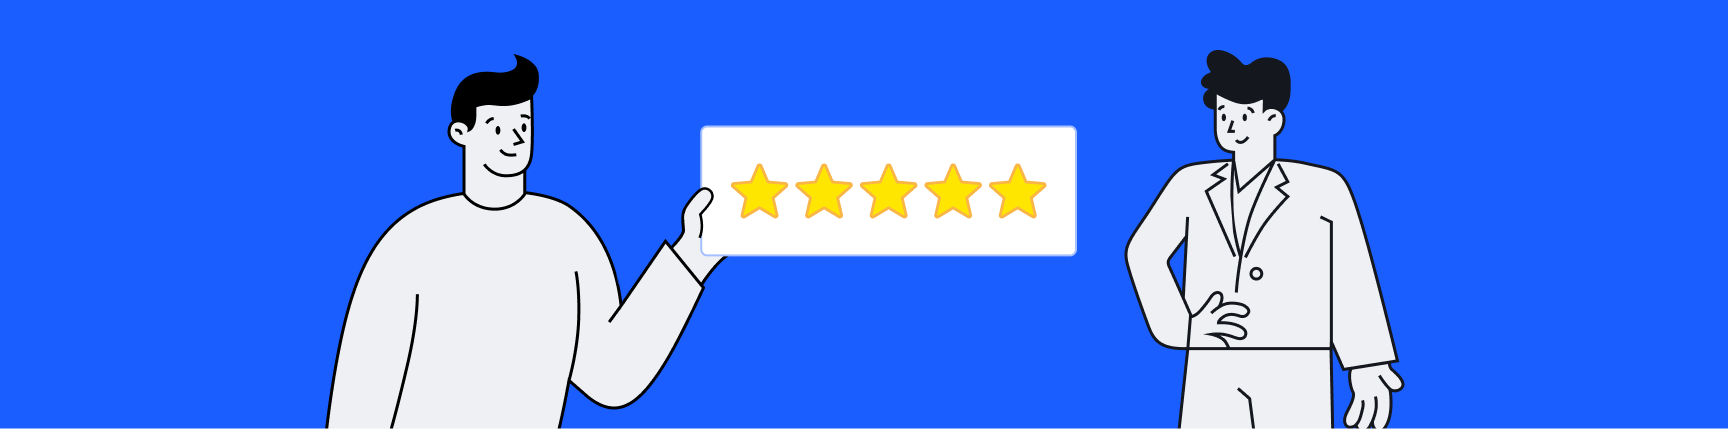 A customer holding up a star rating as part of a quarterly business review meeting